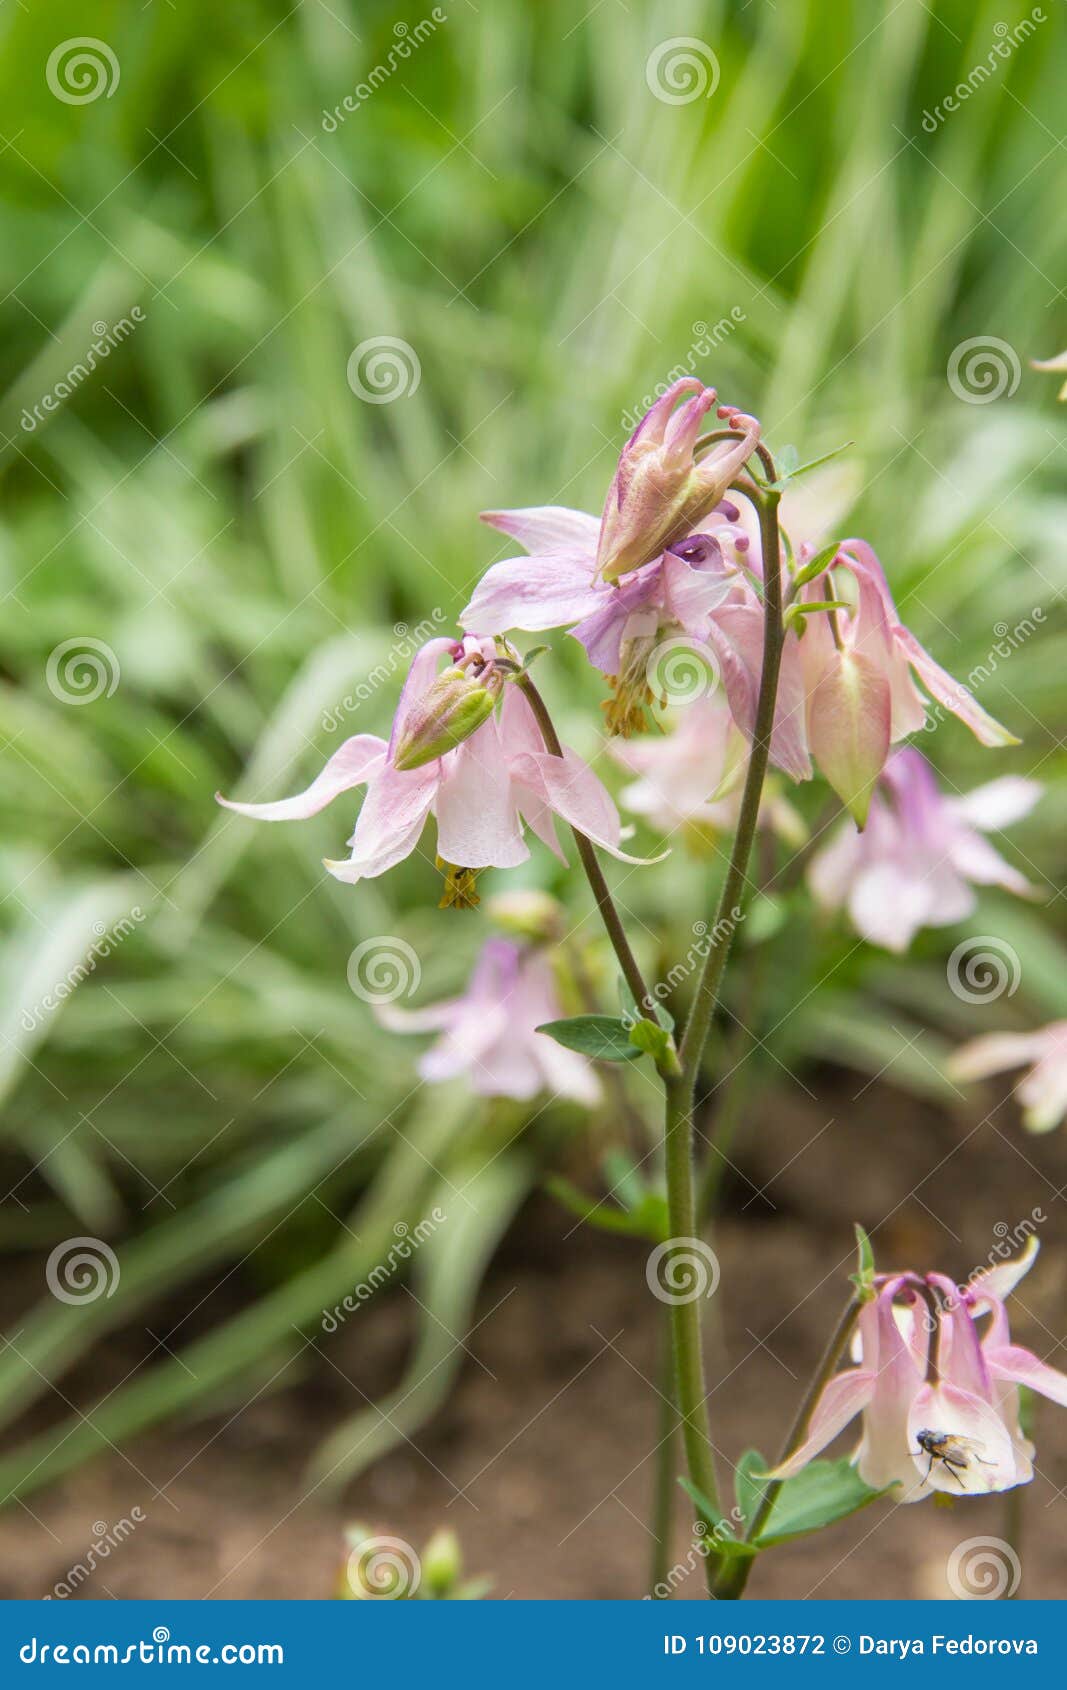 A Photo of Pink Aquilegia Flowers in a Garden. Common Names of ...